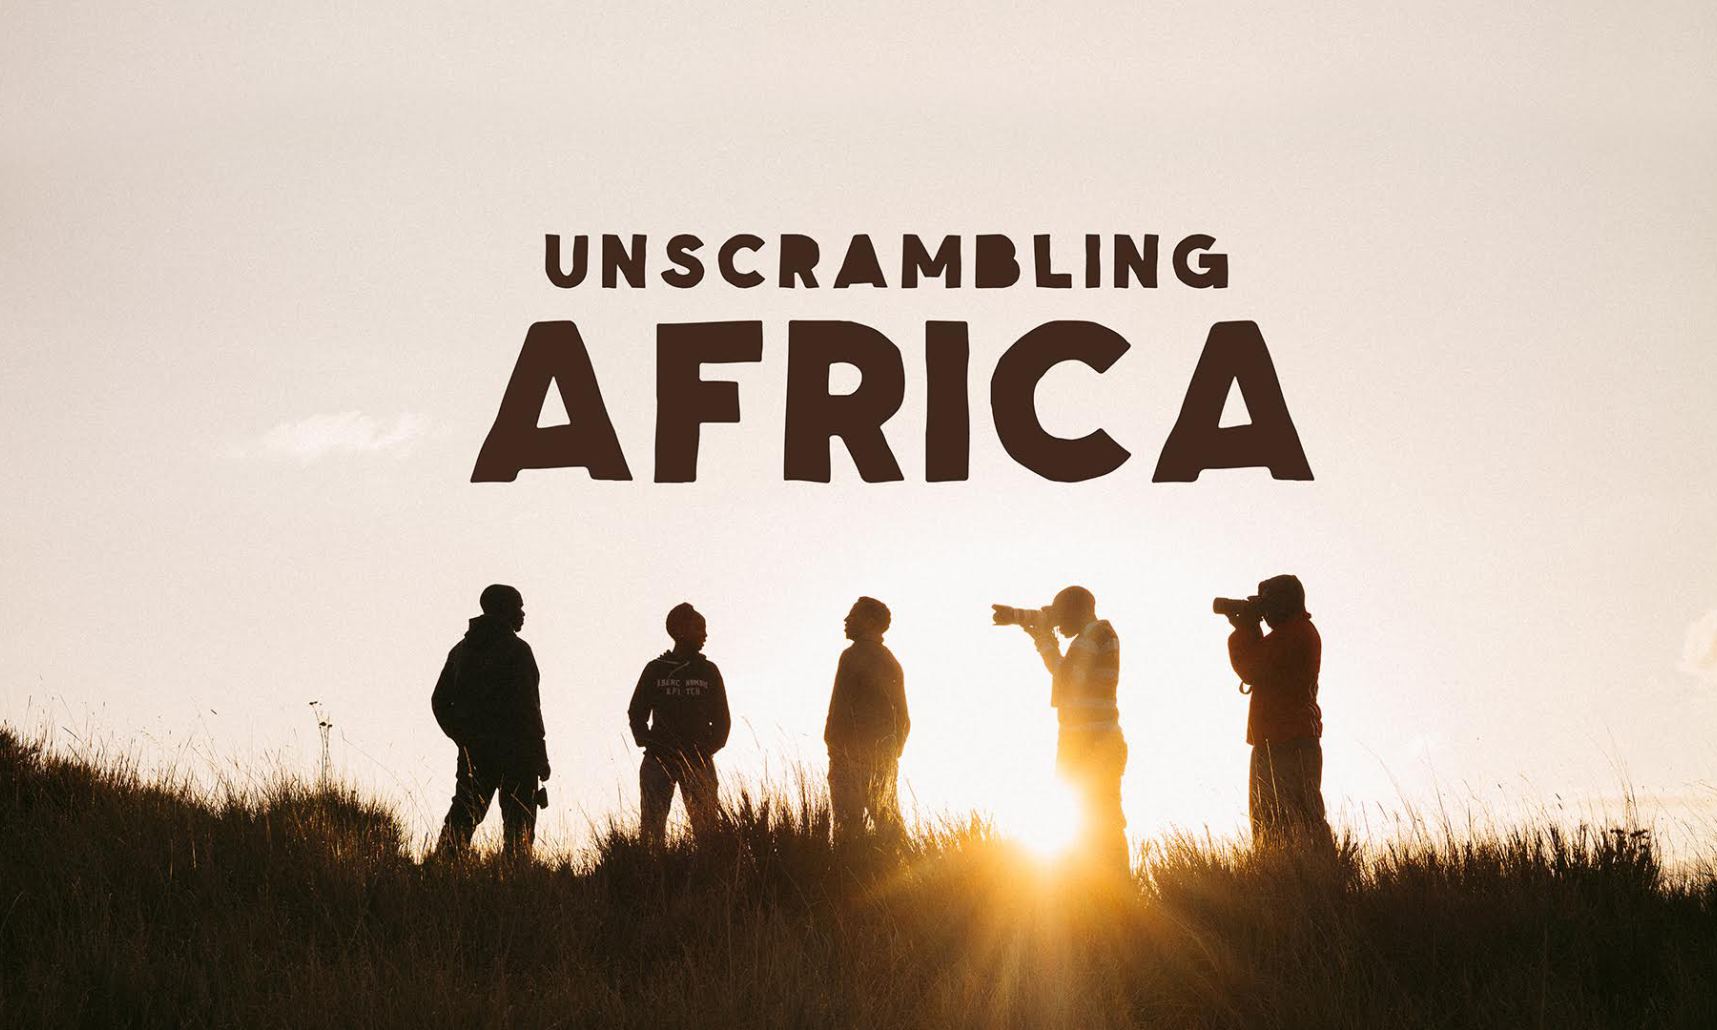  Unscrambling Africa – The Project